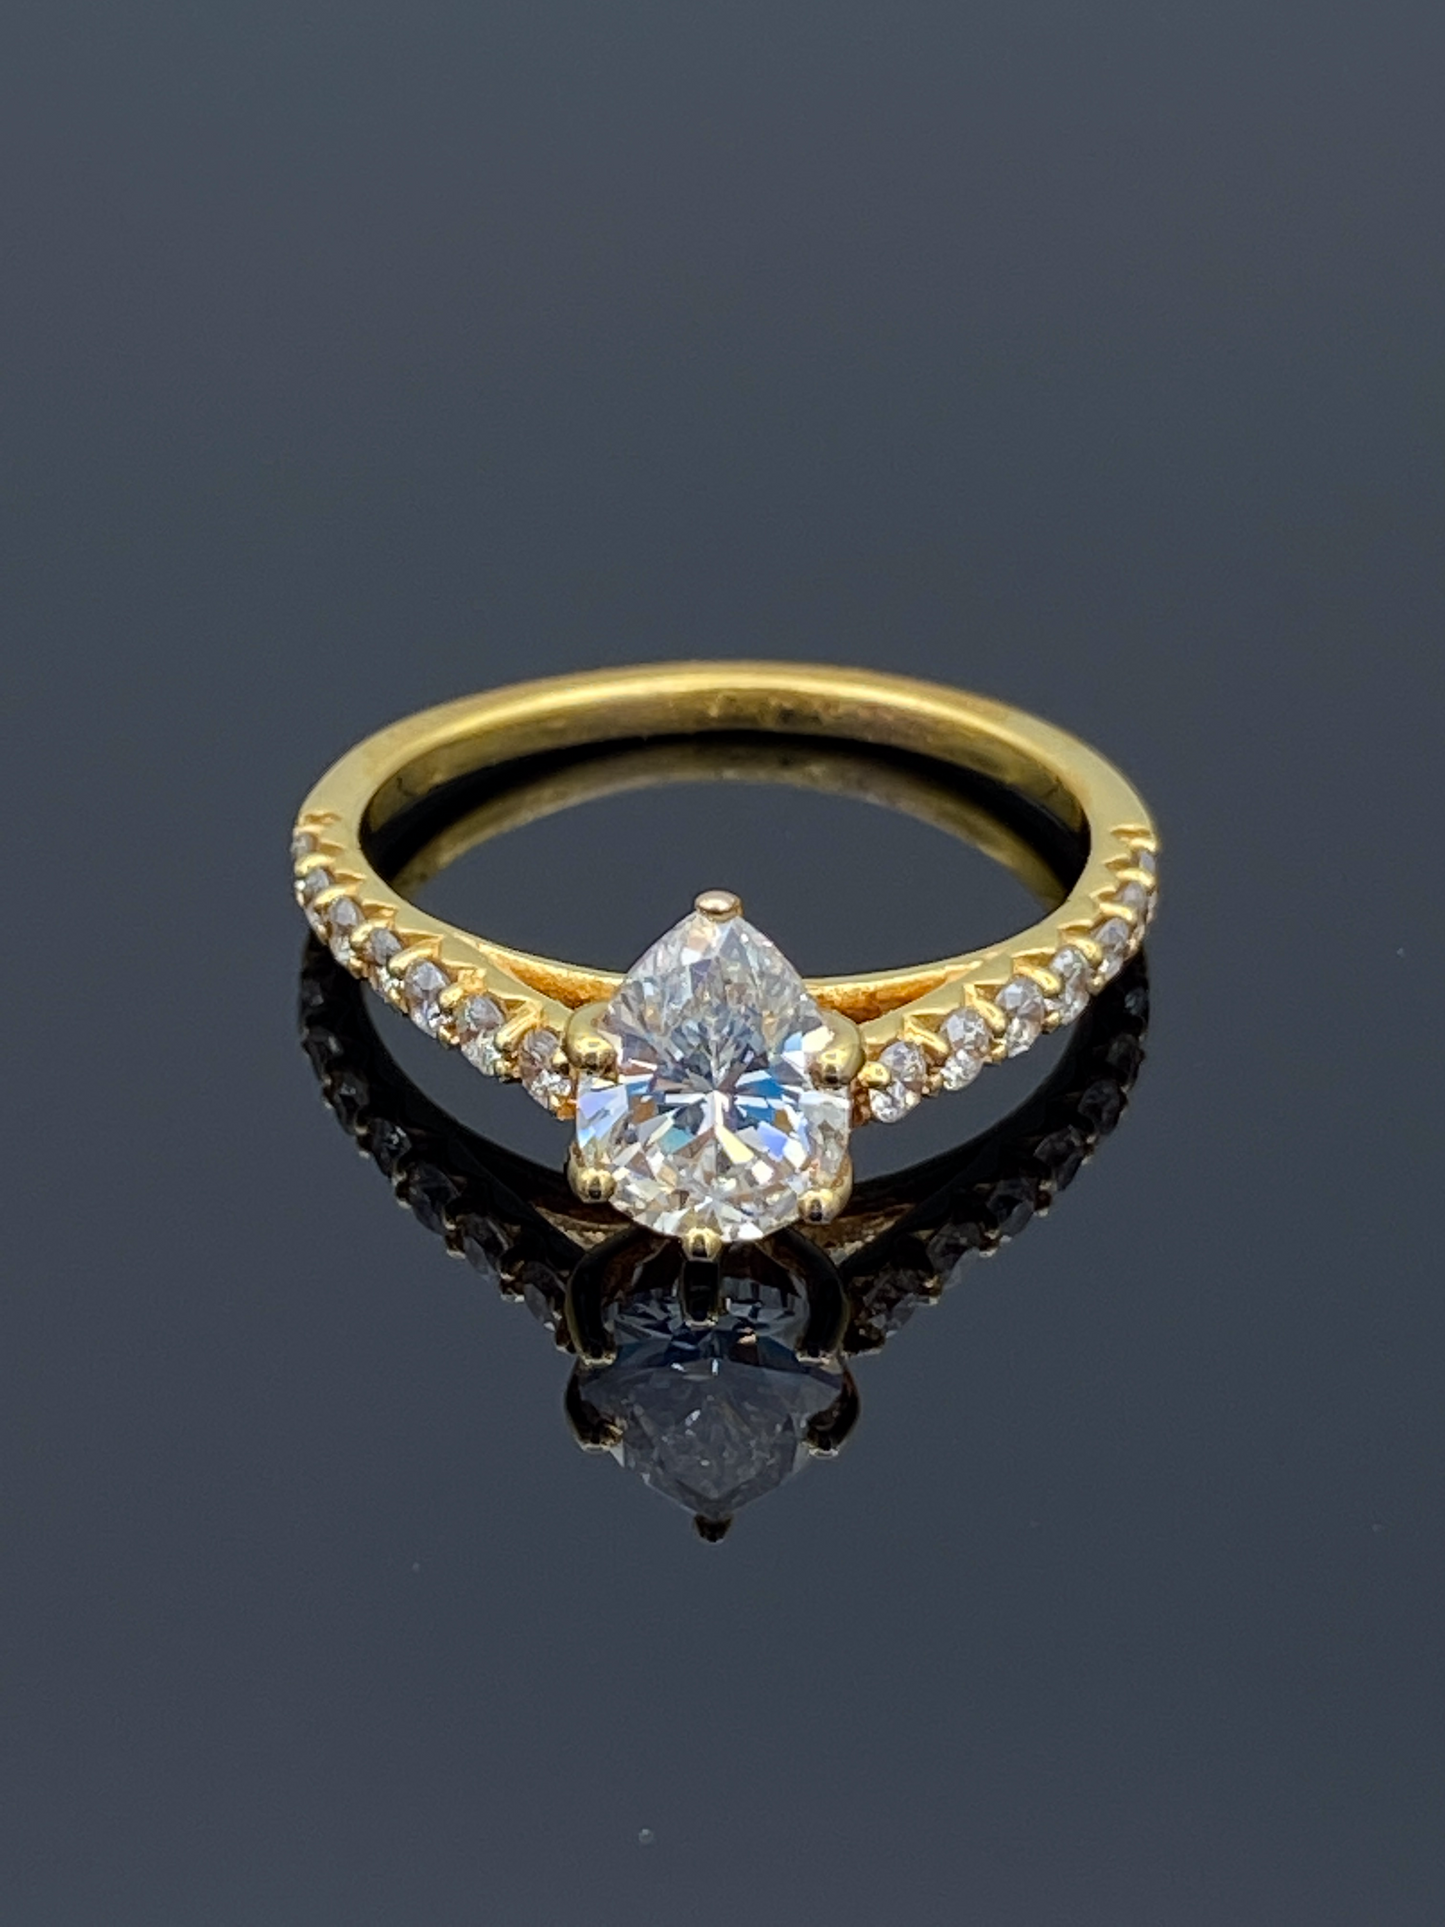 Pear-Shaped Diamond Engagement Ring in14K Yellow Gold - L and L Jewelry